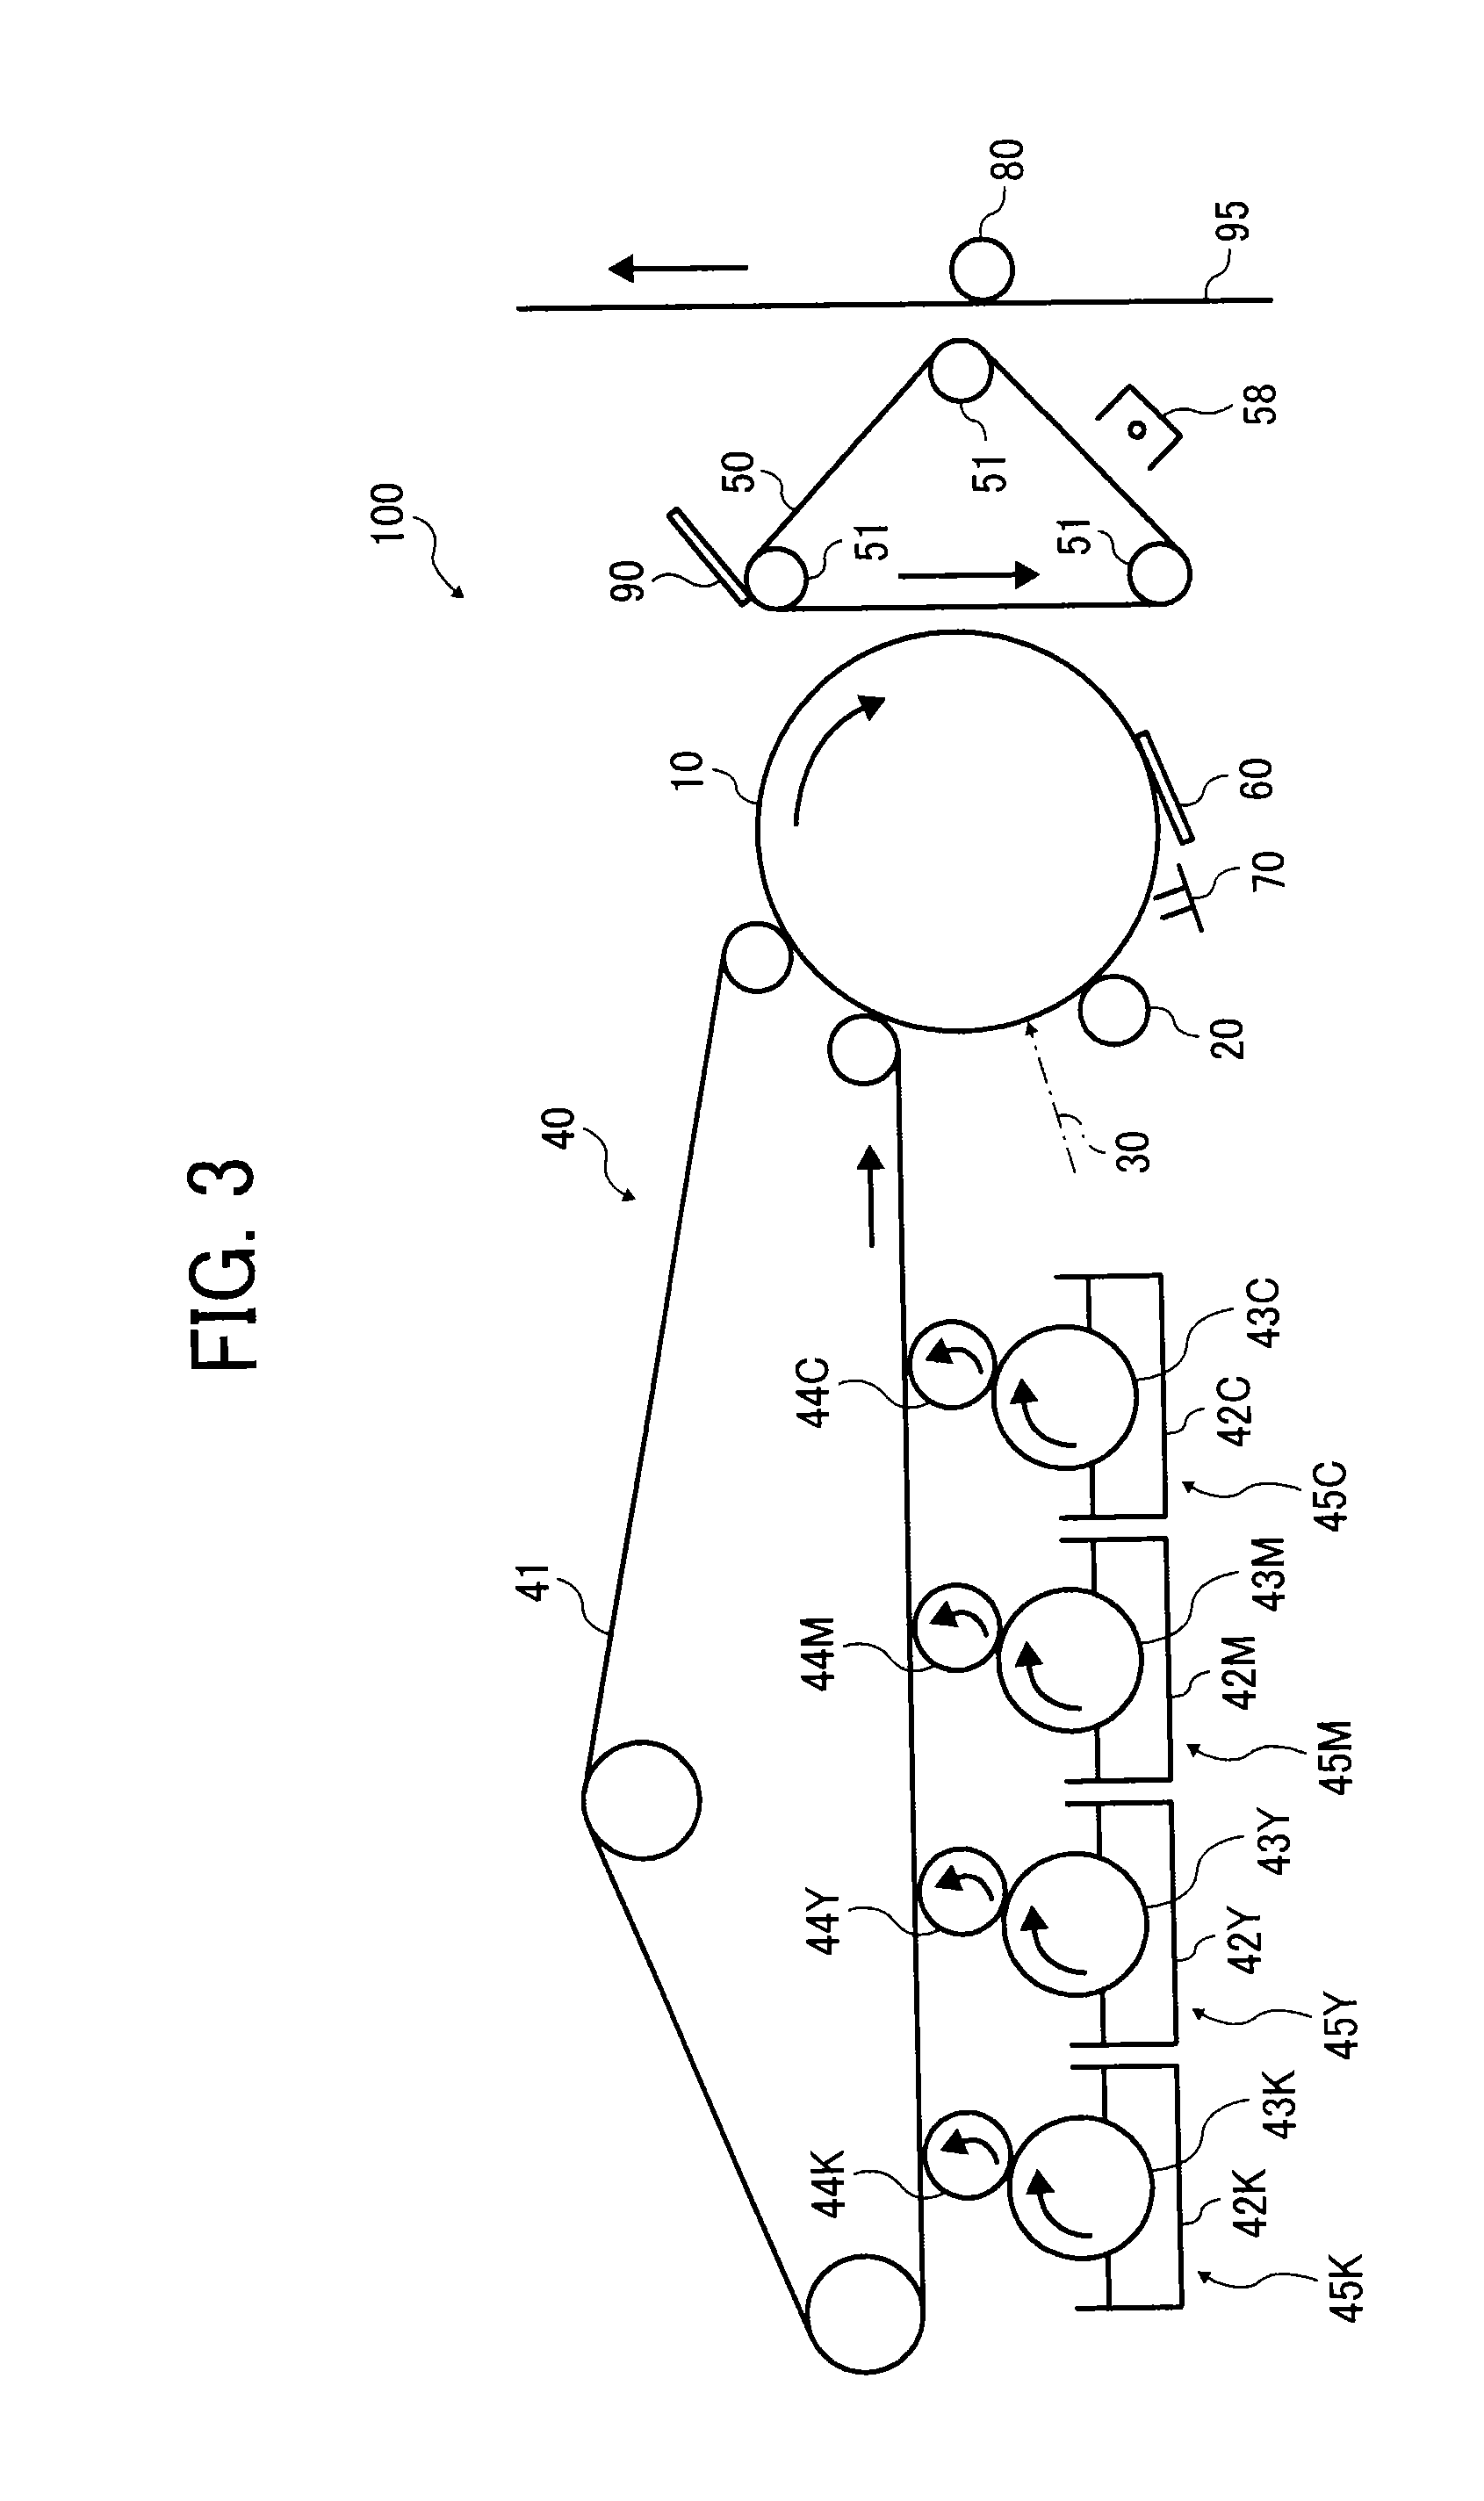 White toner, and image forming method and image forming apparatus using the white toner